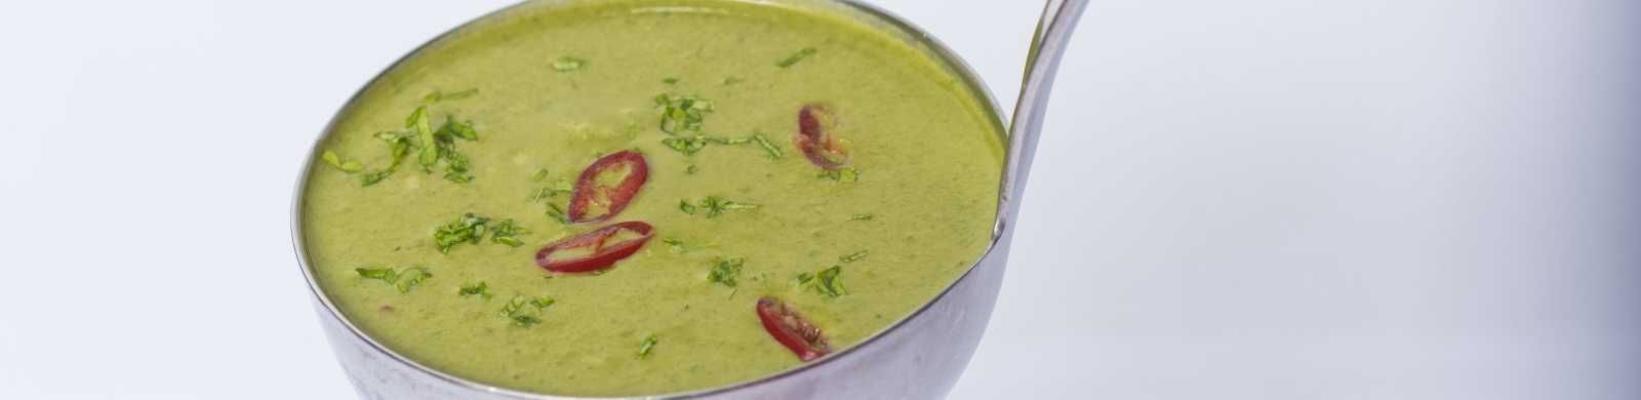 avocado spinach soup from wendy dekker